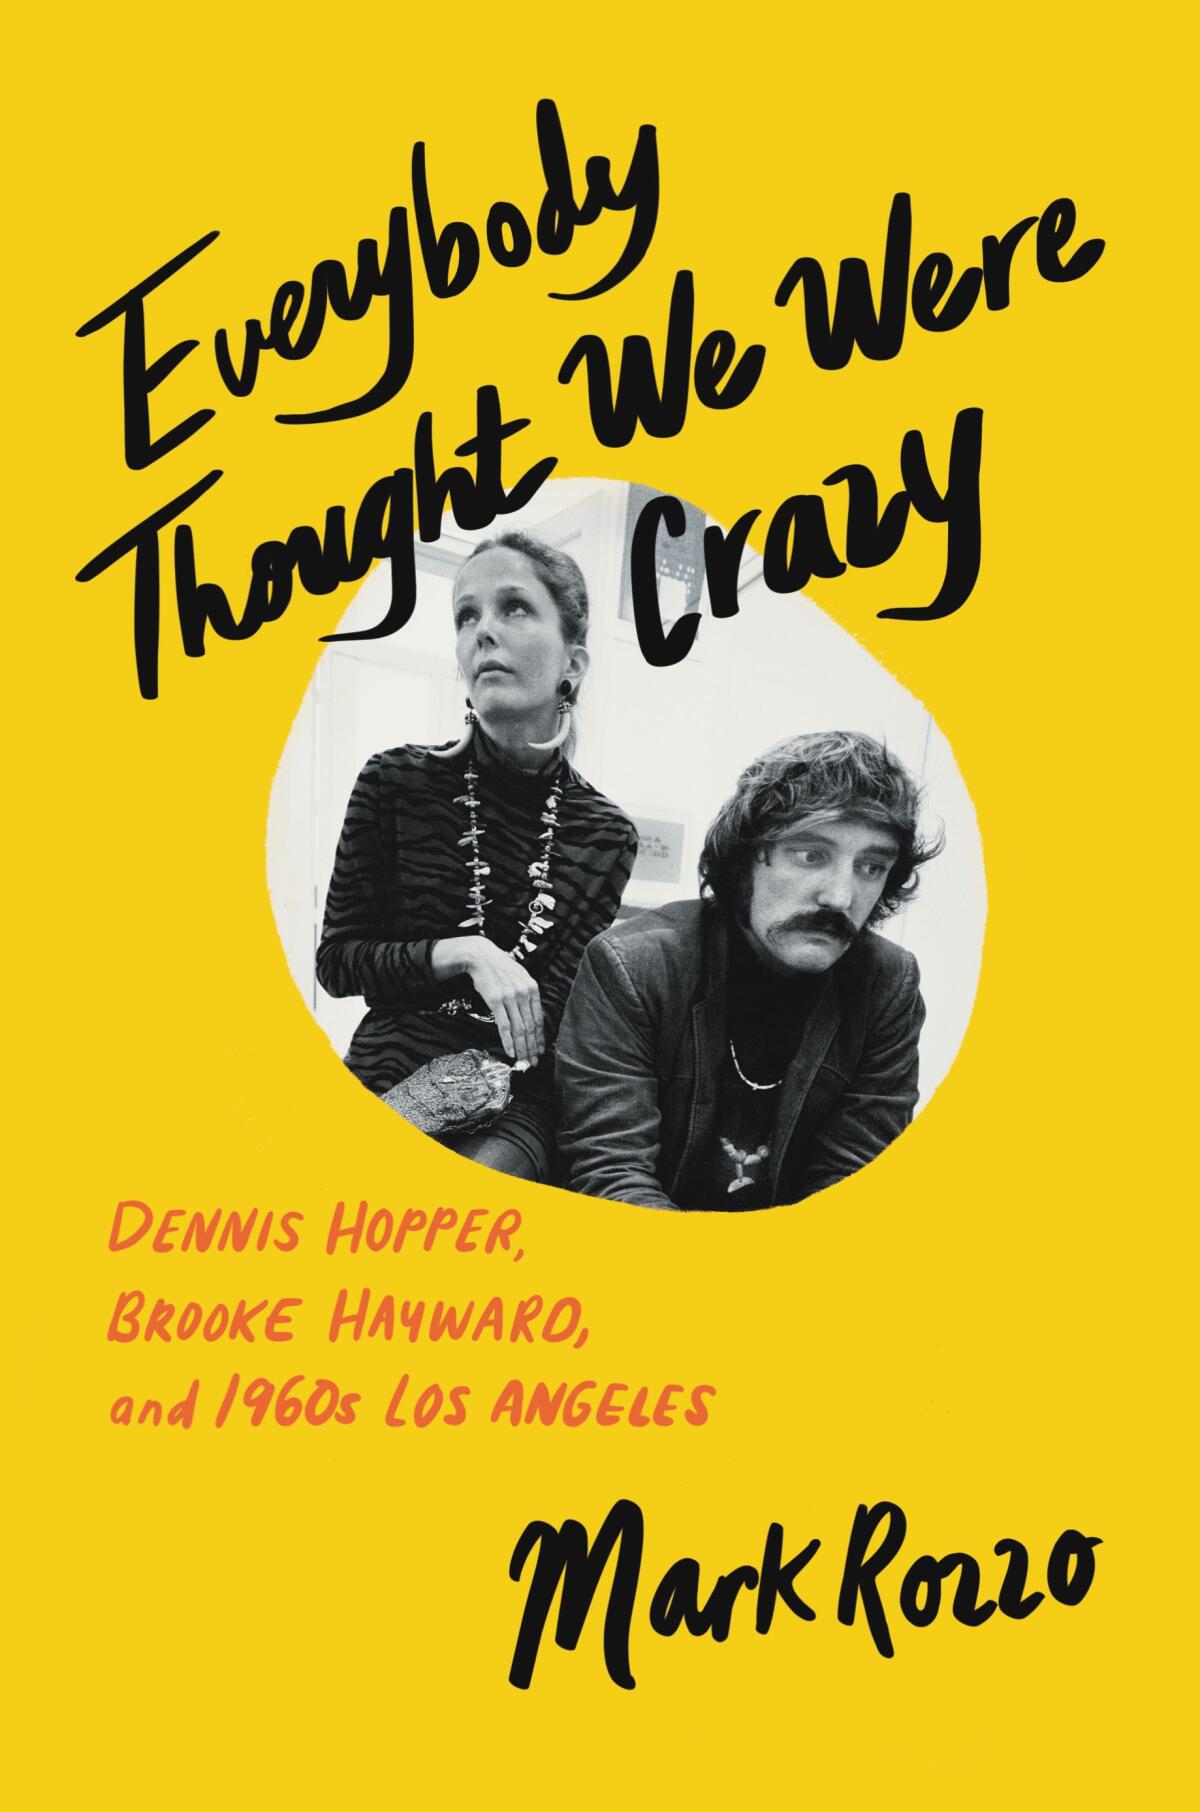 The cover of "Everybody Thought We Were Crazy" by Mark Rozzo